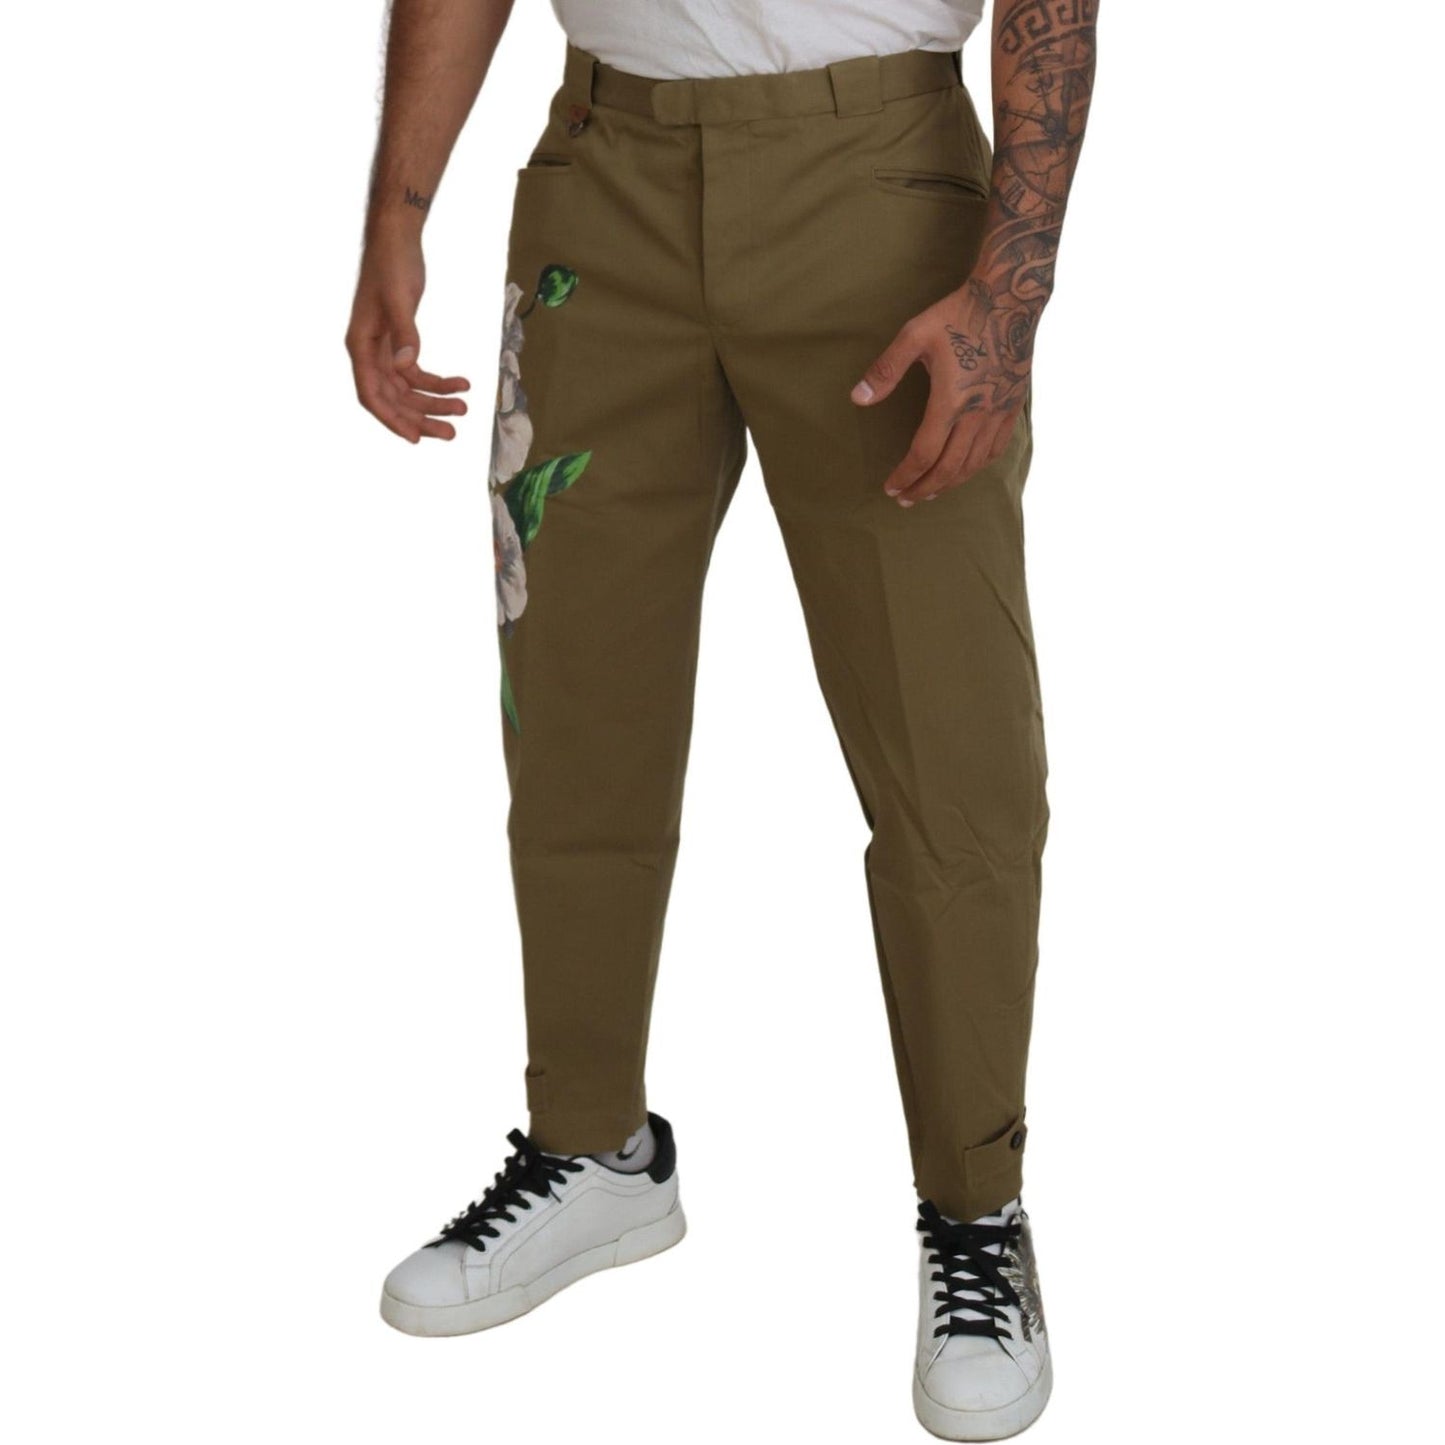 Dolce & Gabbana Exquisite Floral Beige Chino Pants beige-cotton-stretch-floral-chinos-pants